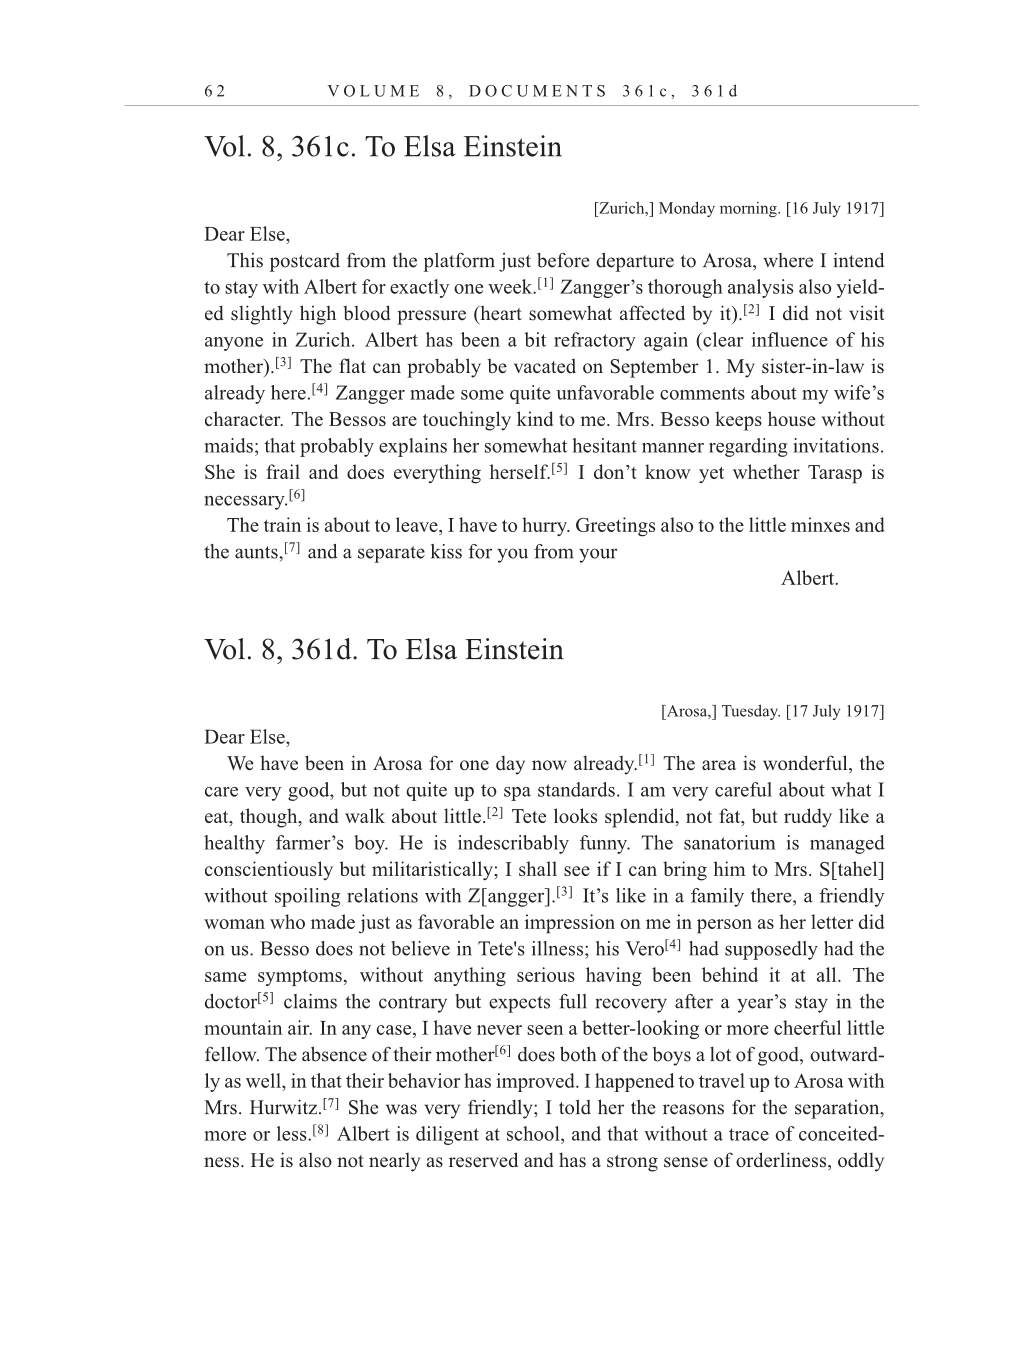 Volume 10: The Berlin Years: Correspondence, May-December 1920, and Supplementary Correspondence, 1909-1920 (English translation supplement) page 62